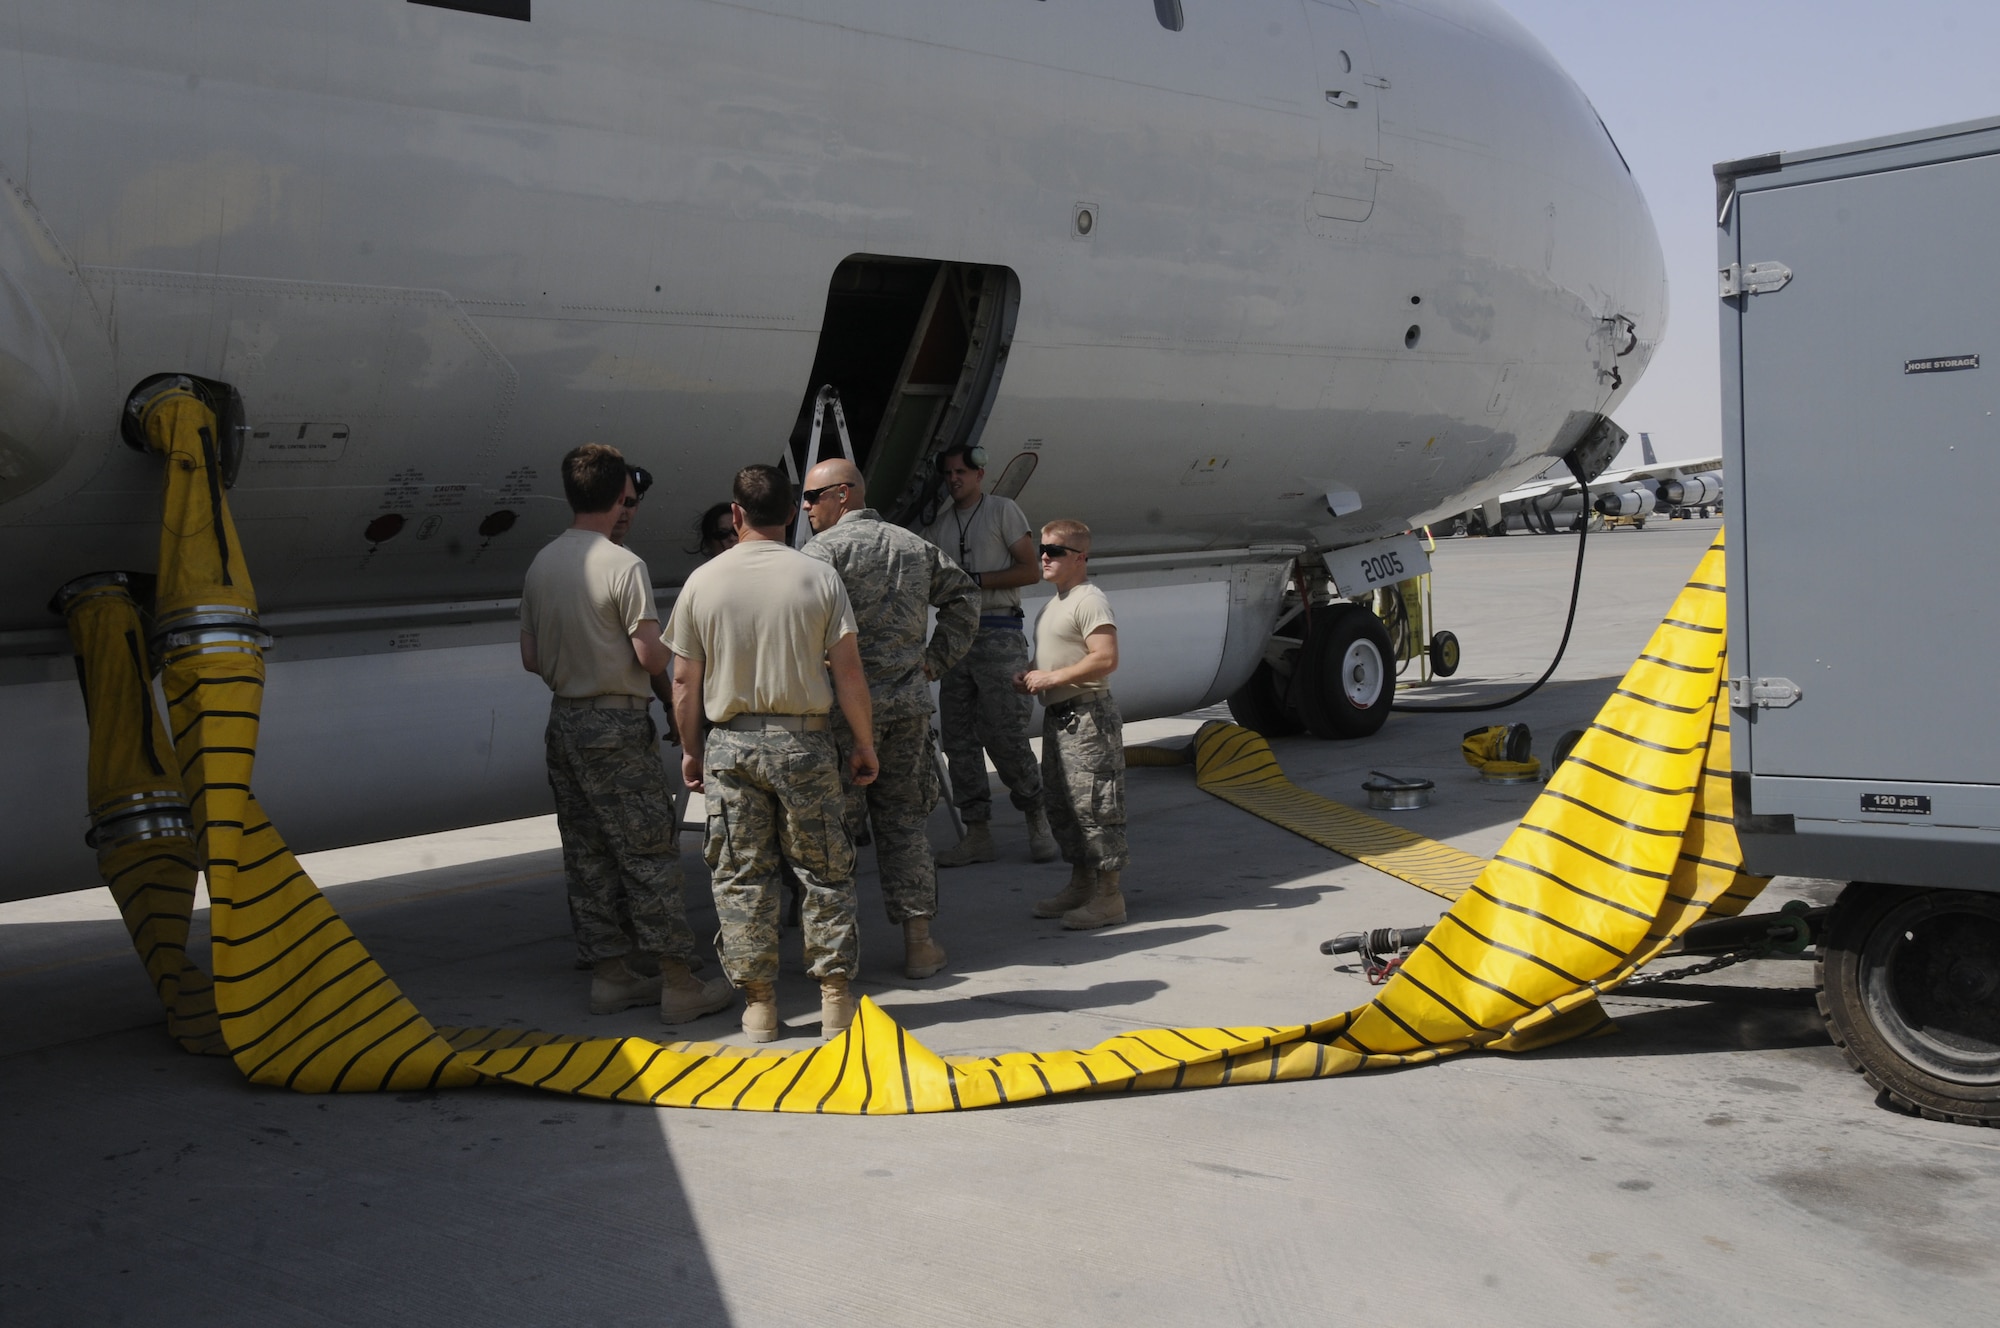 About a dozen people in the 642nd Combat Sustainment Group are involved with developing specifications for a redesign of flightline air conditioners that are critical to the operation of aircraft in high temperatures. Courtesy photo